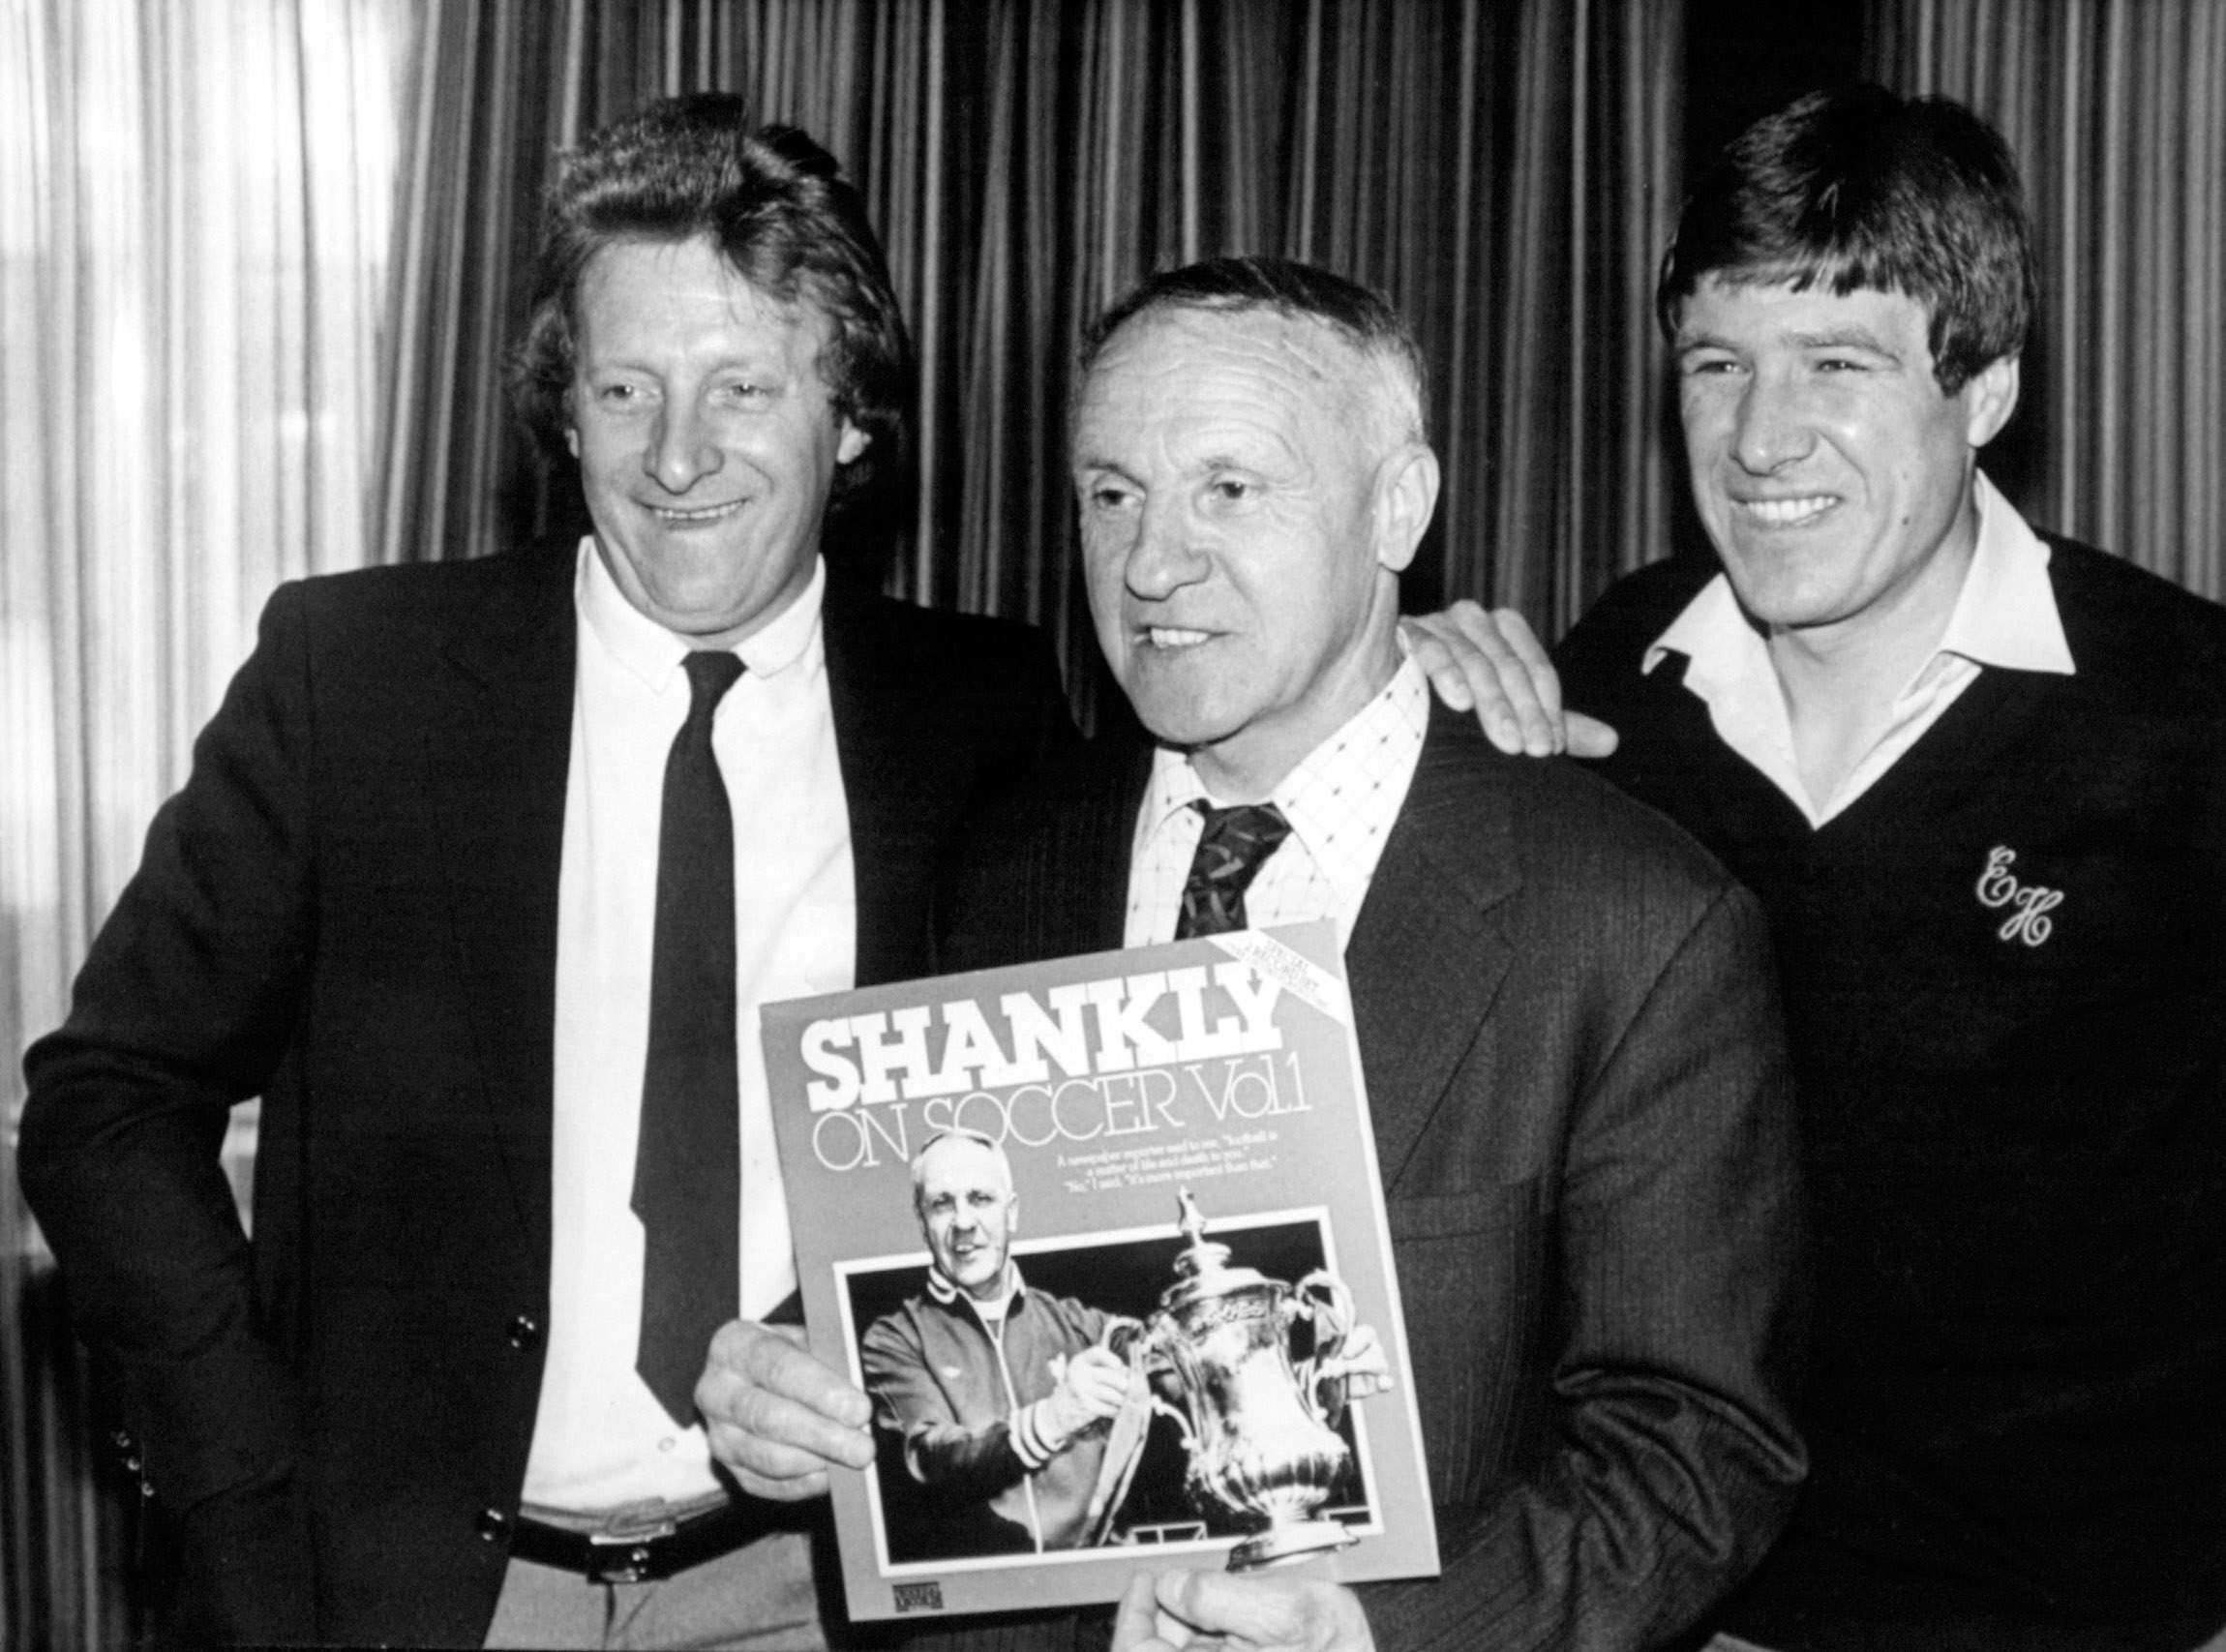 Bill Shankly launches his first record with the help of Denis Law and Emlyn Hughes at the Press Club in London, 1981. He died five months later aged 68.